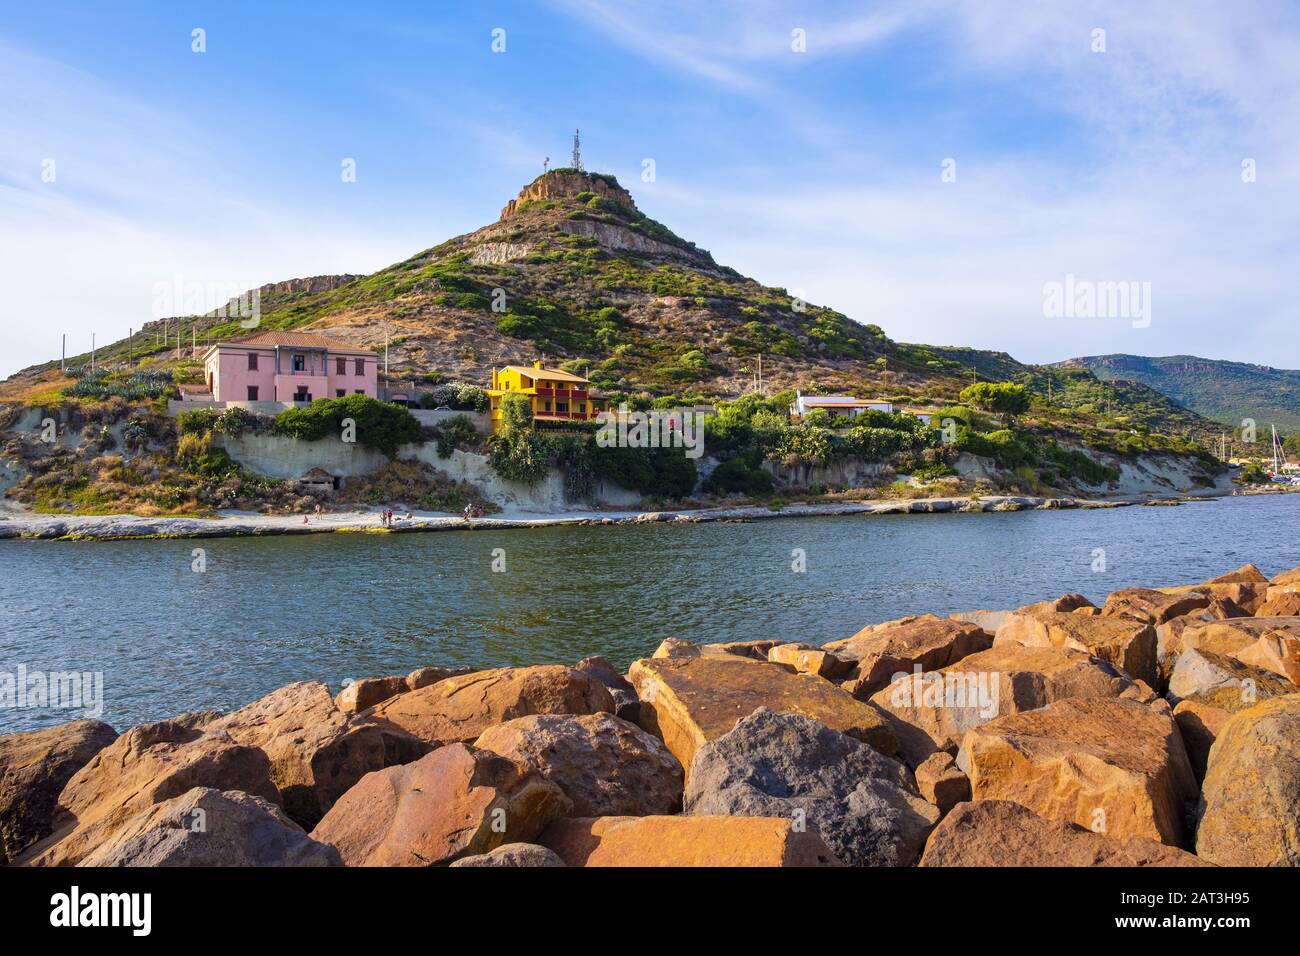 Bosa Marina, Sardinia / Italy - 2018/08/13: Panoramic view of the hill with television broadcasting towers and antennas over the town of Bosa Marina by the Temo river embankment Stock Photo